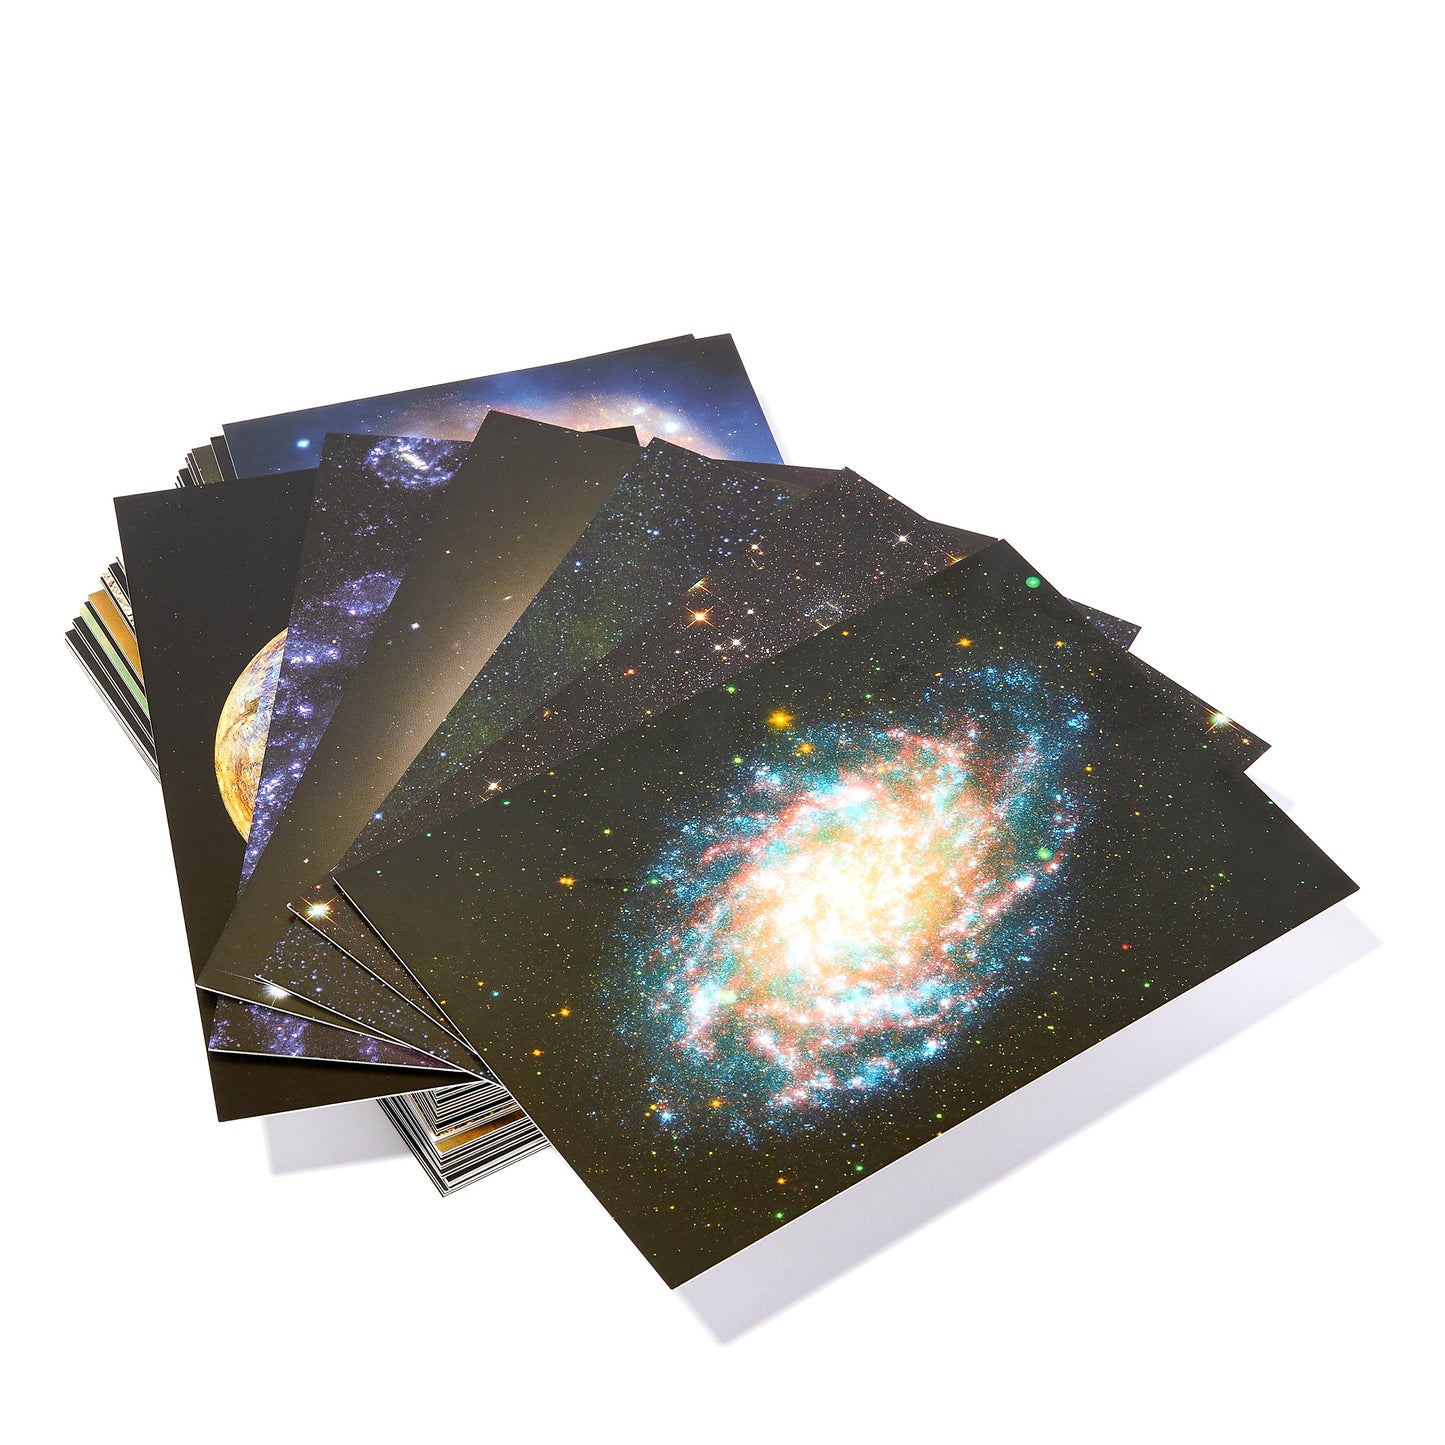 EARTH AND SPACE POSTCARD SET